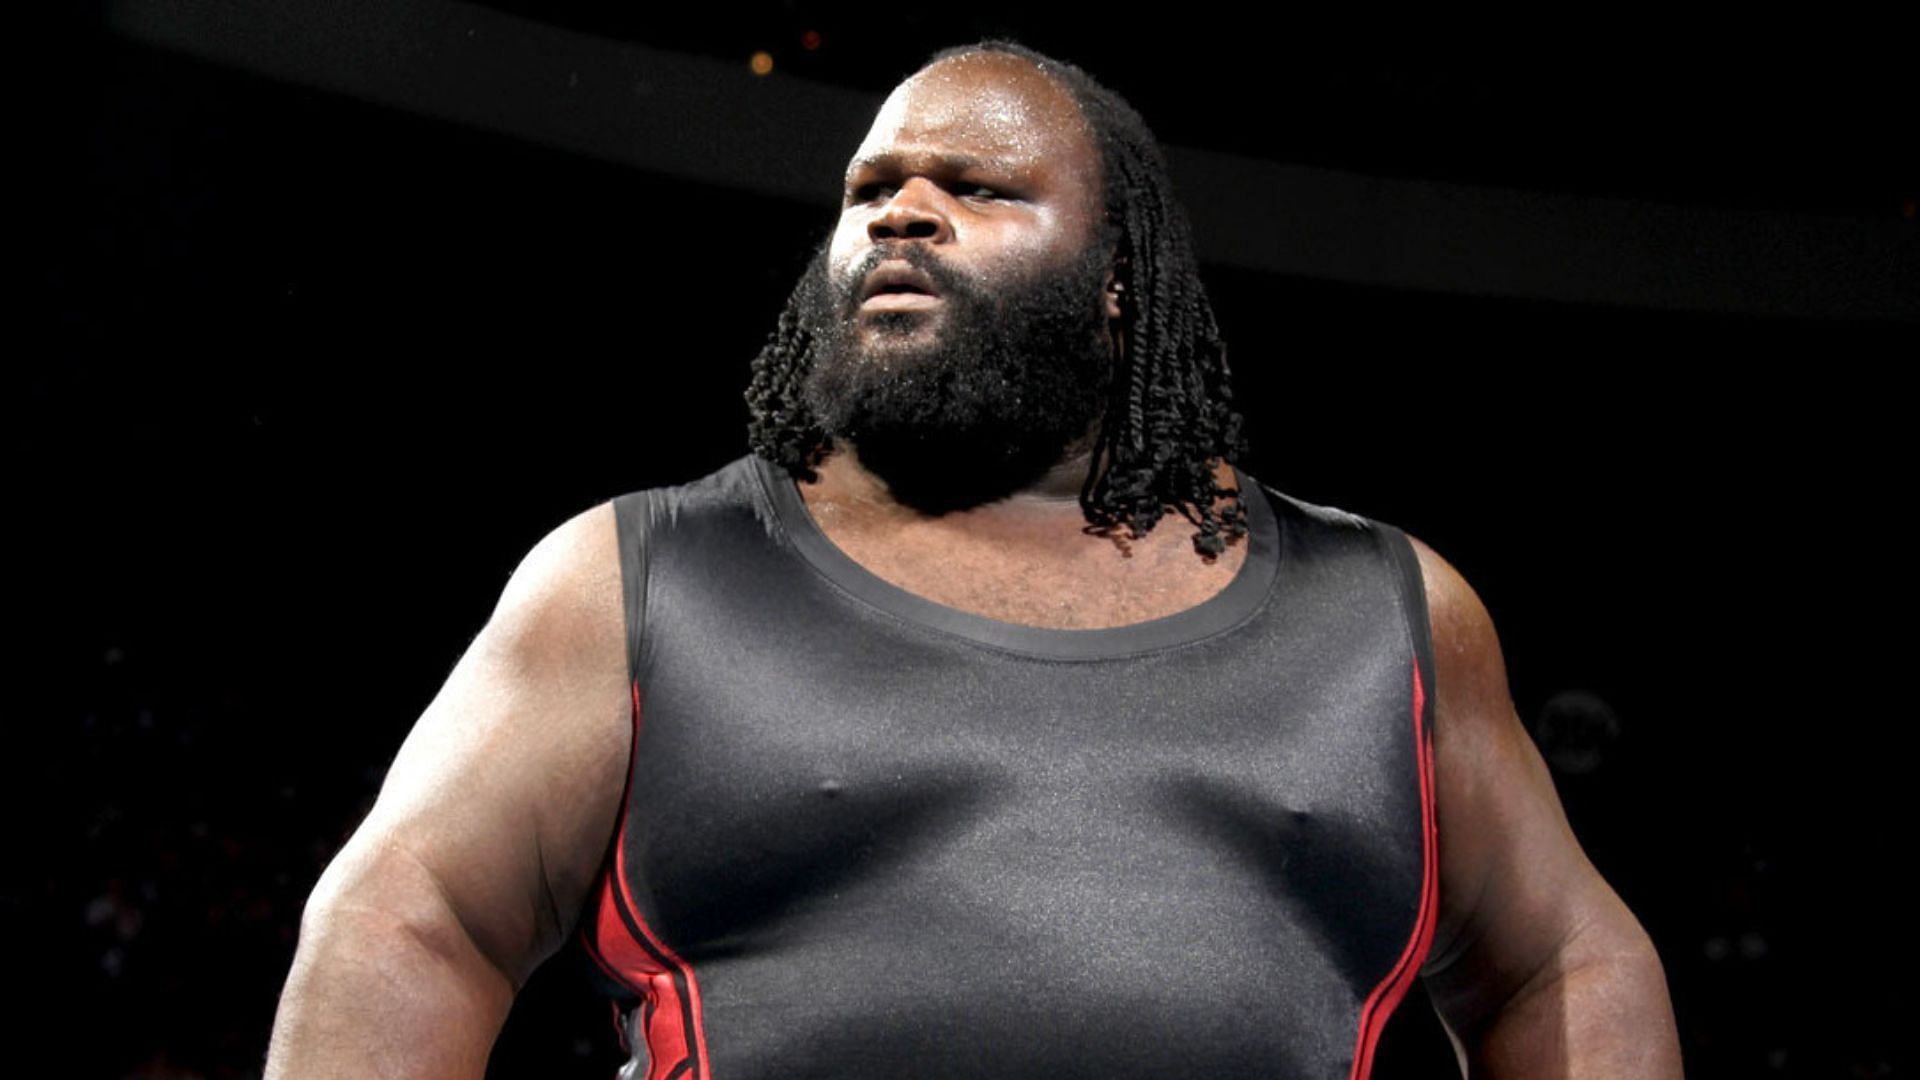 Behind the Curtain: Mark Henry’s Struggle with Backstage Heat in WWE